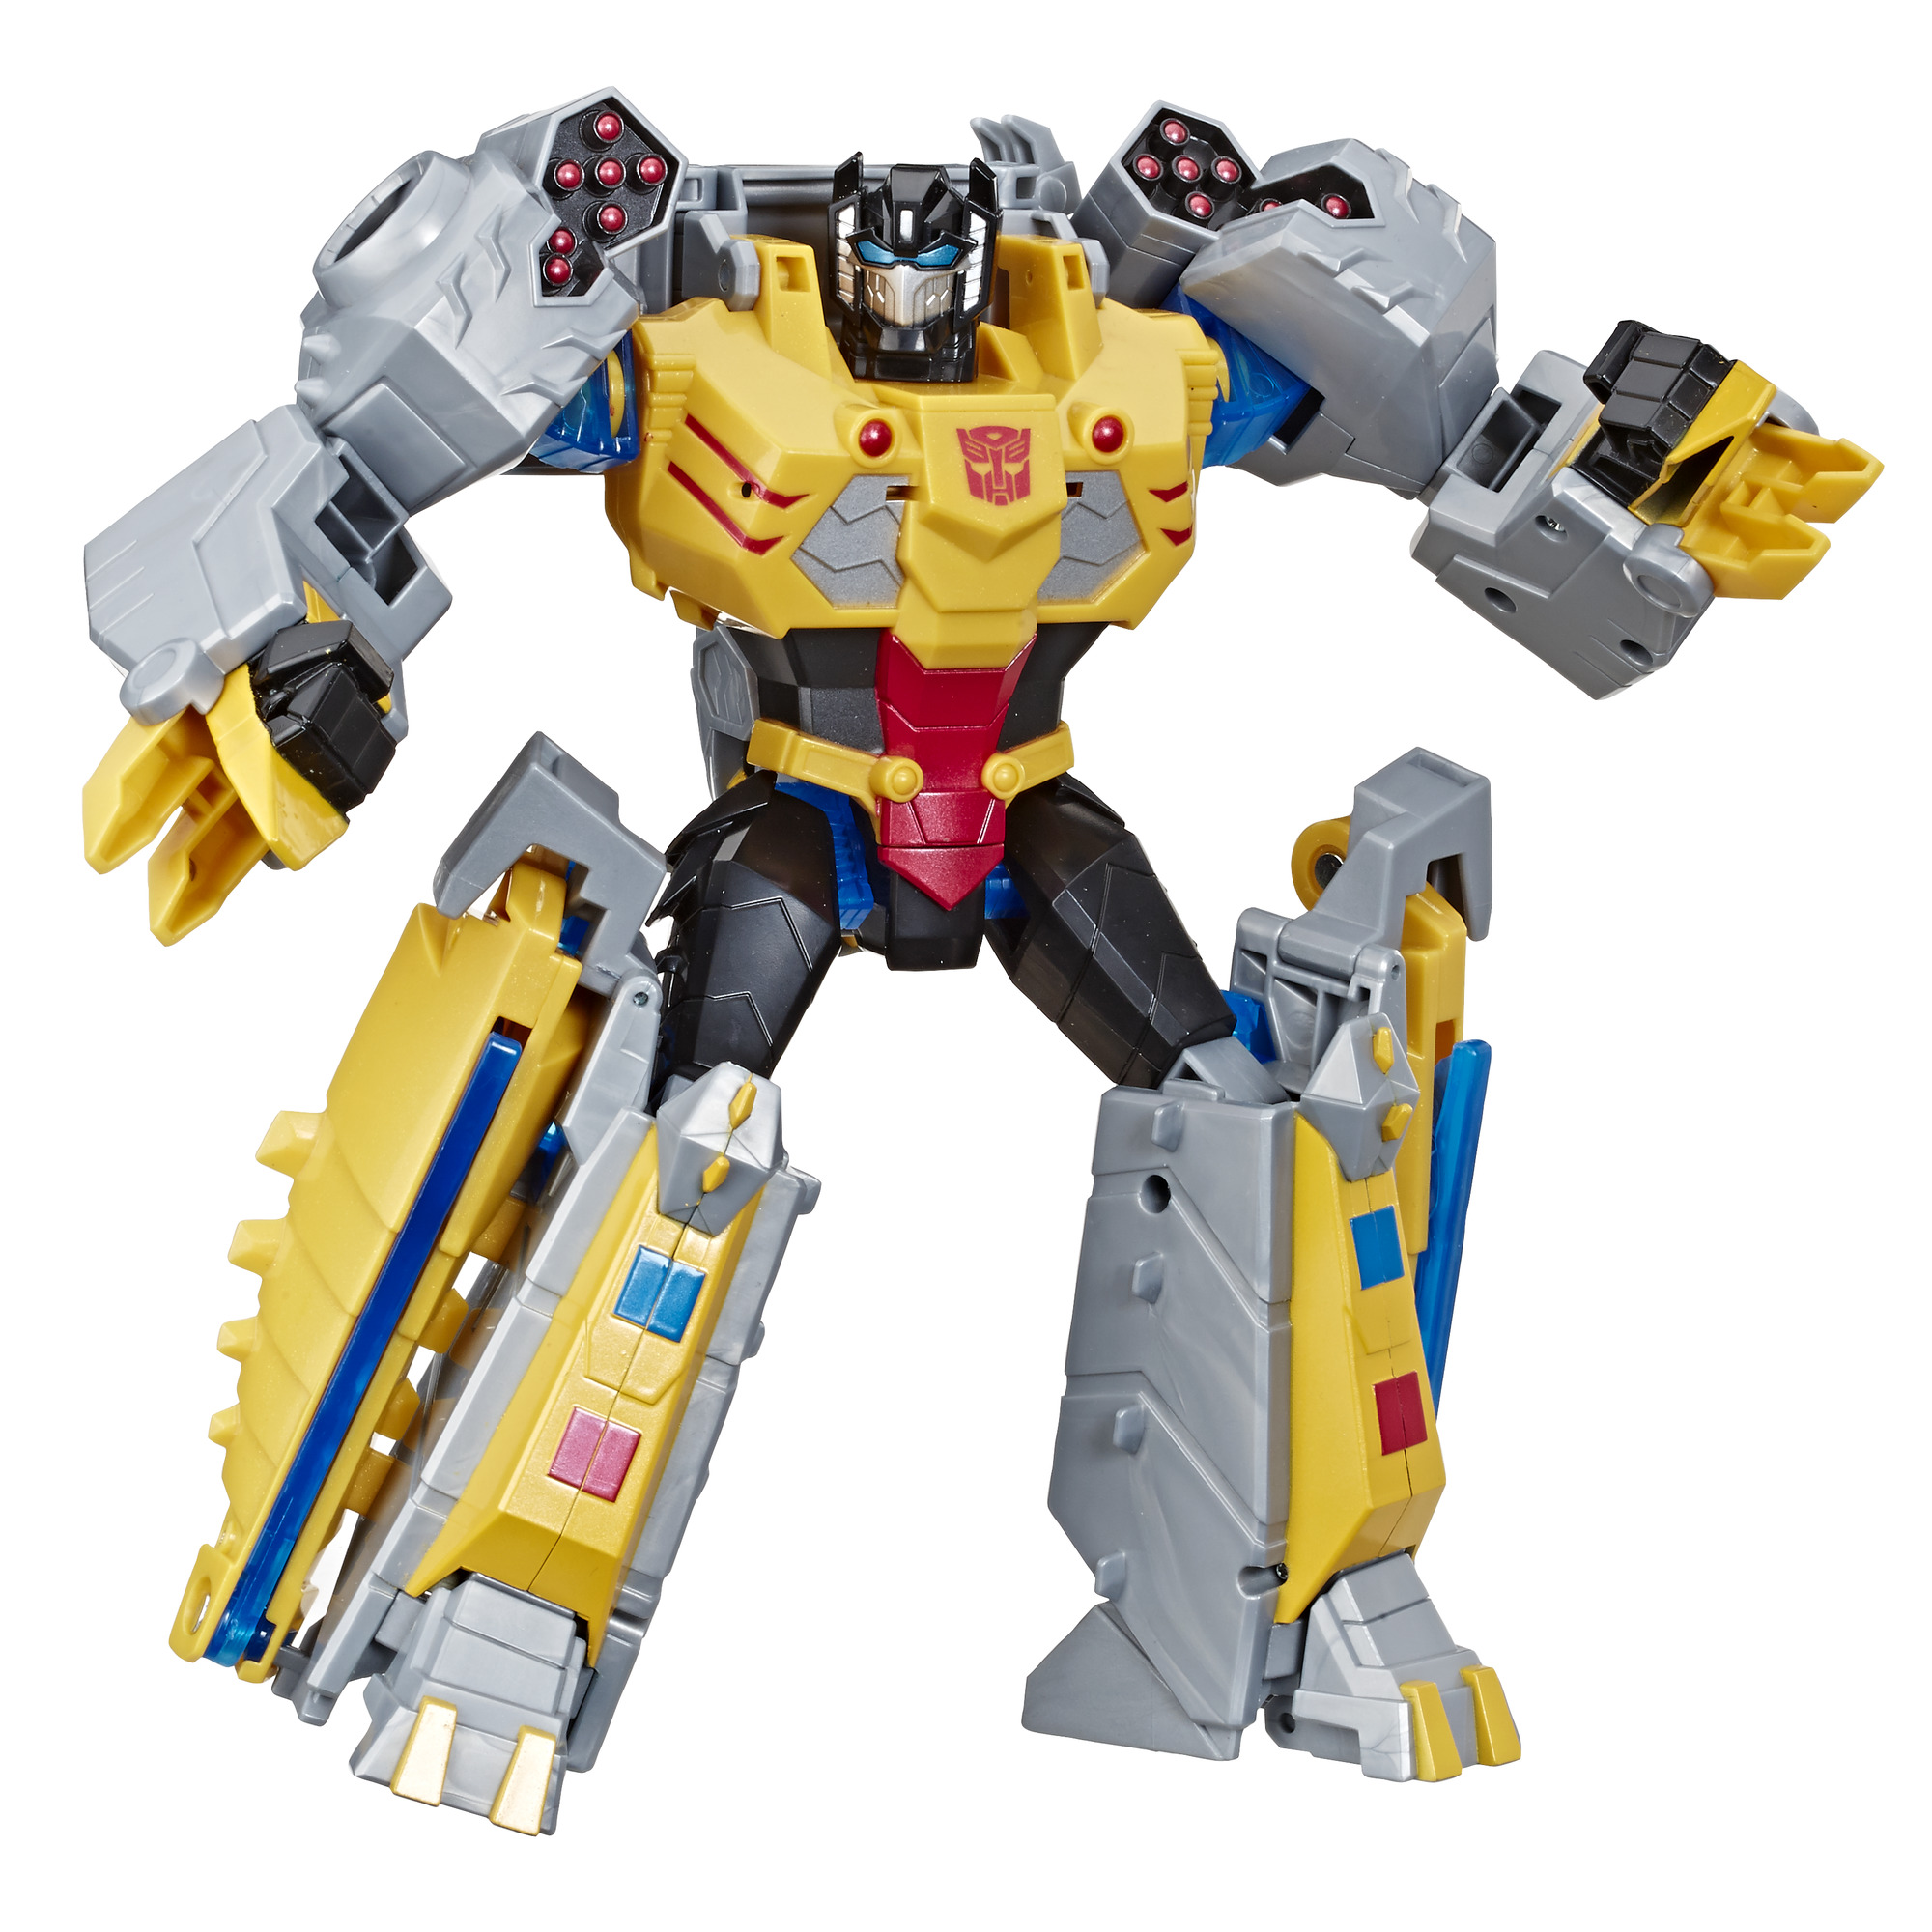 Transformers News: My Pick for the Best Toy to give a Younger Transformers Fan this Christmas